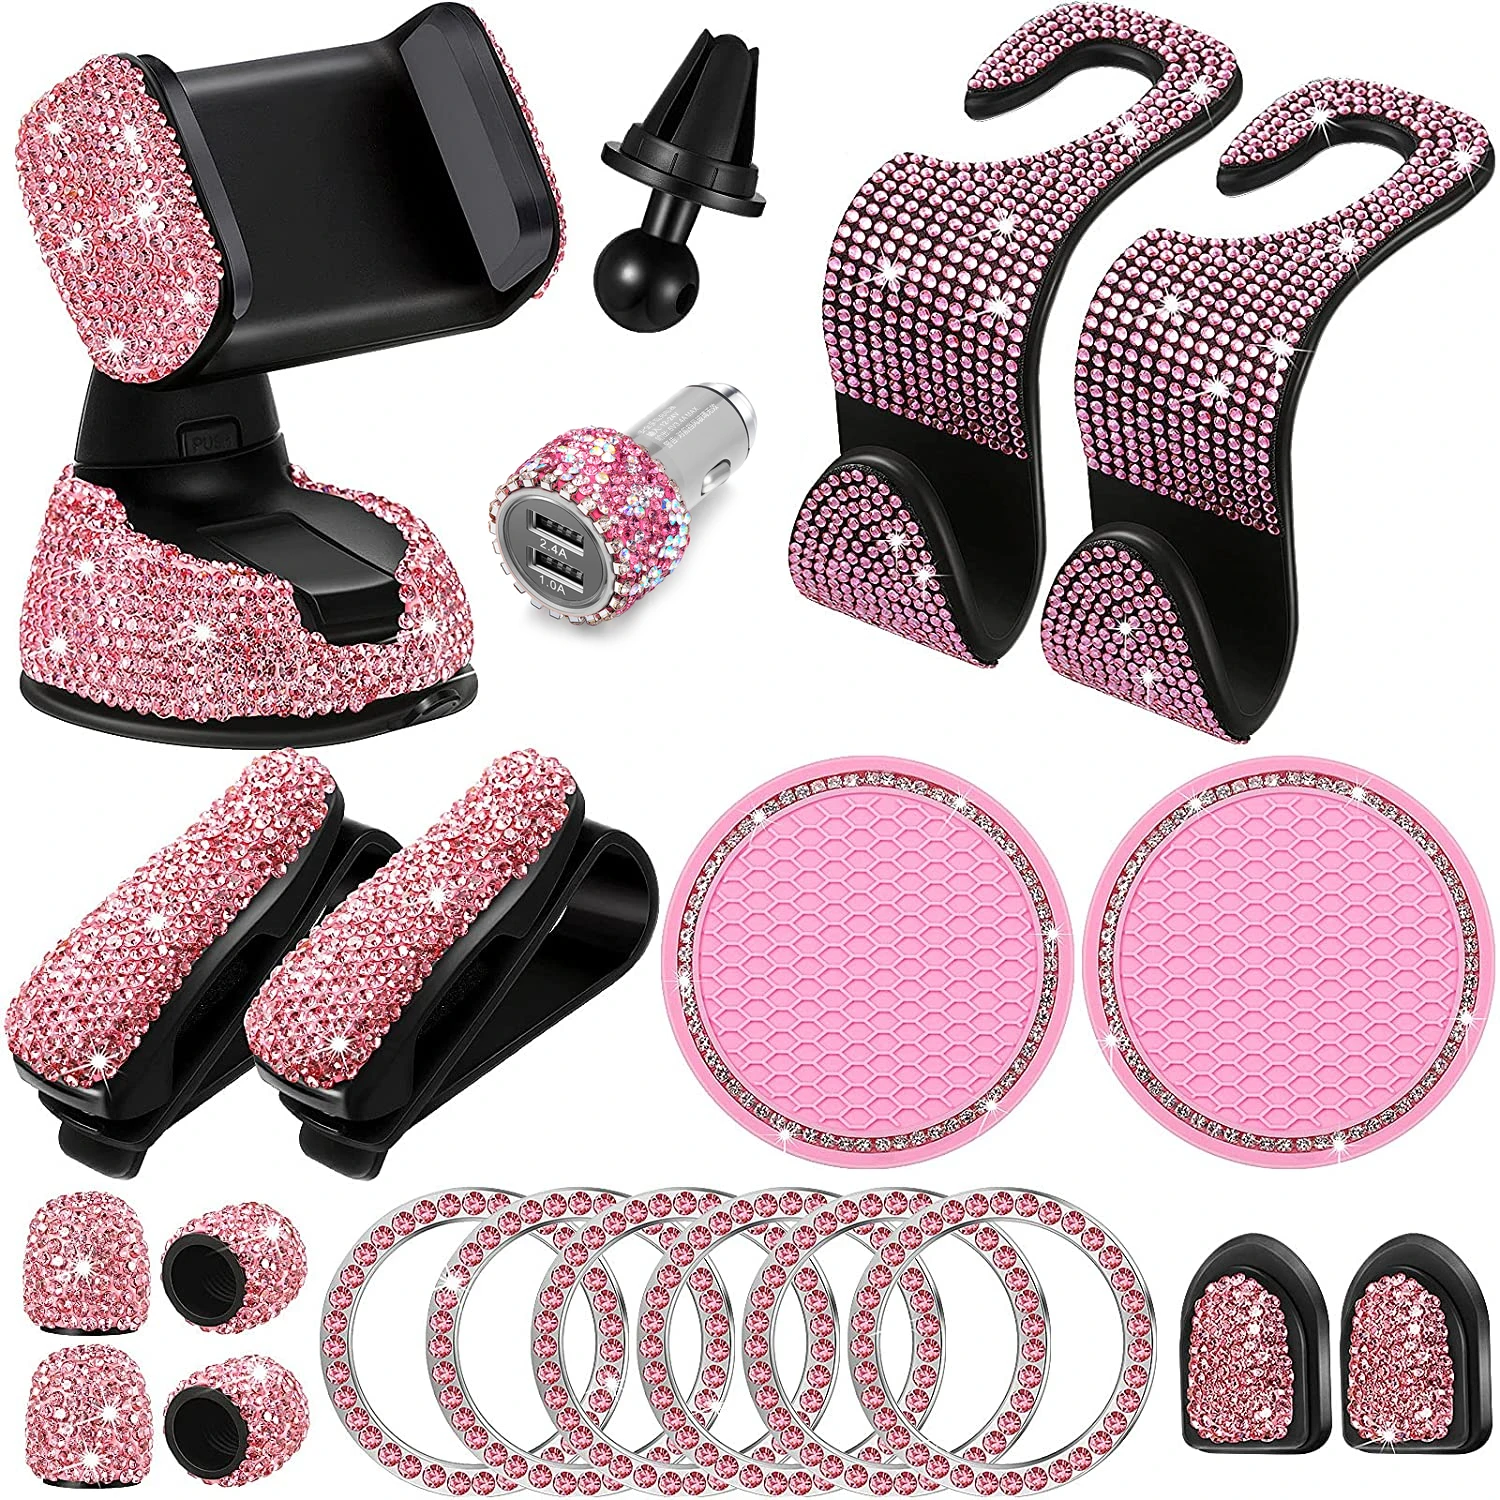 Hot Rose Pink Bling Car Accessories Interior Set for Women Girls Glitter  Plush Warm Automotive Seat Covers Cushion Crown Decor - AliExpress